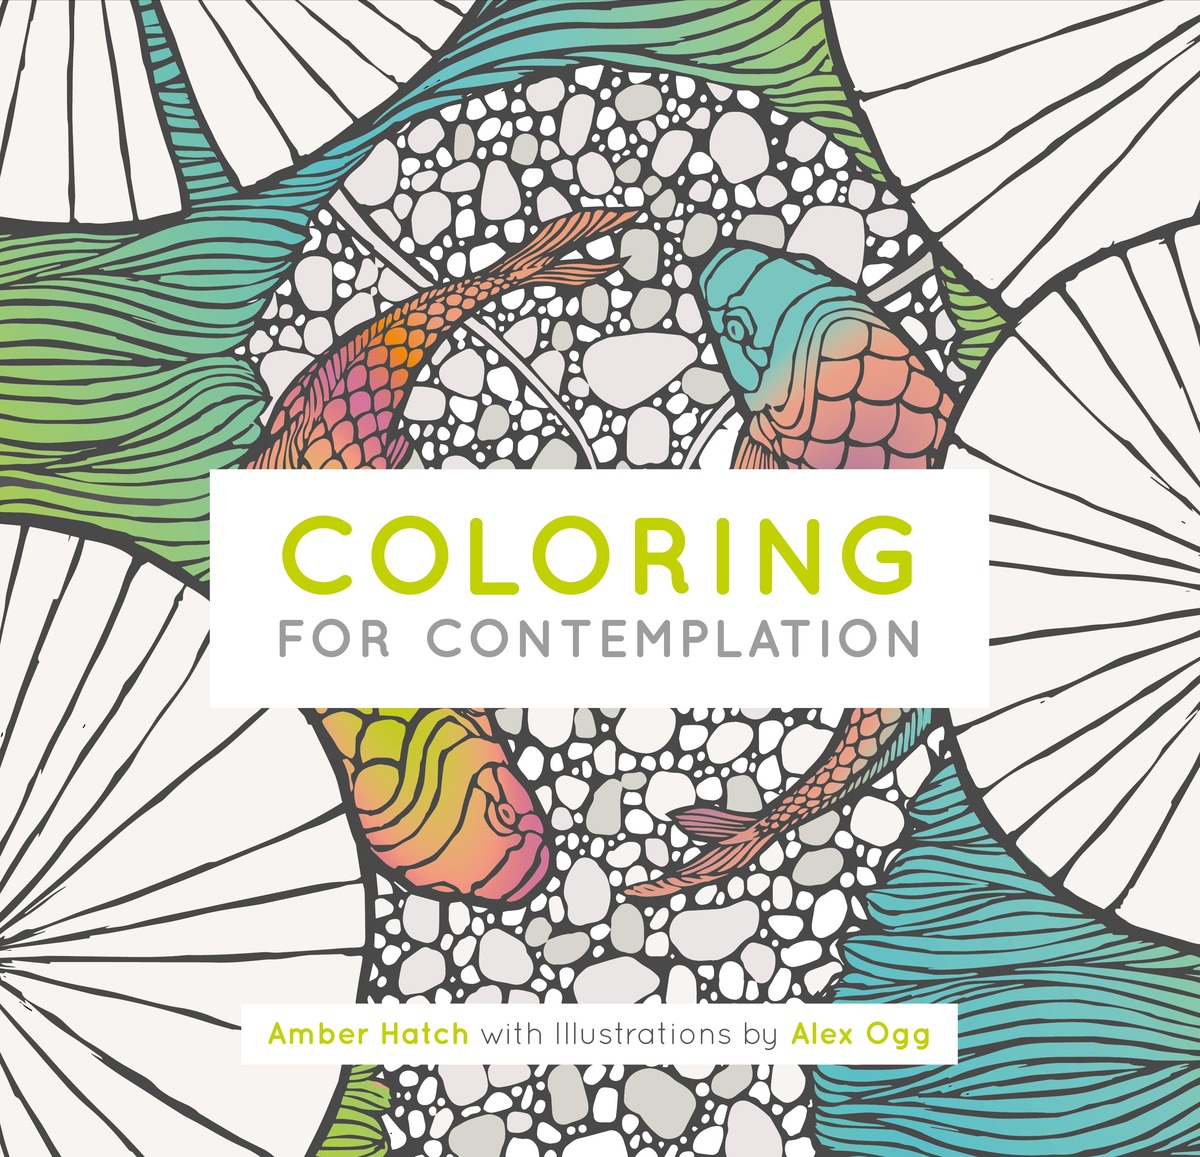 Colouring for contemplation